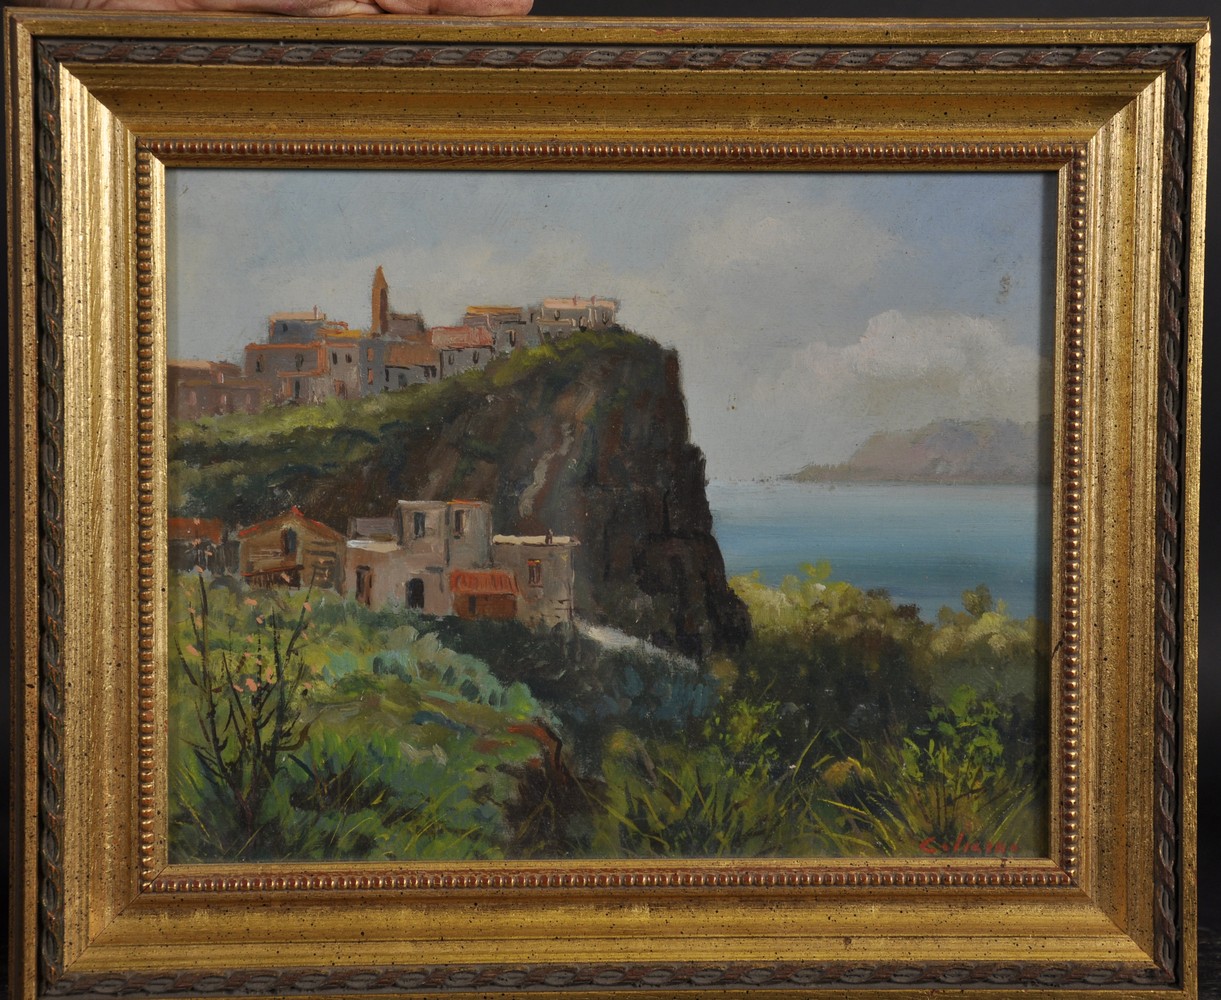 20th Century Continental School. A Clifftop Scene, Oil on Panel, Signed Indistinctly, 9.5" x 12". - Image 2 of 3